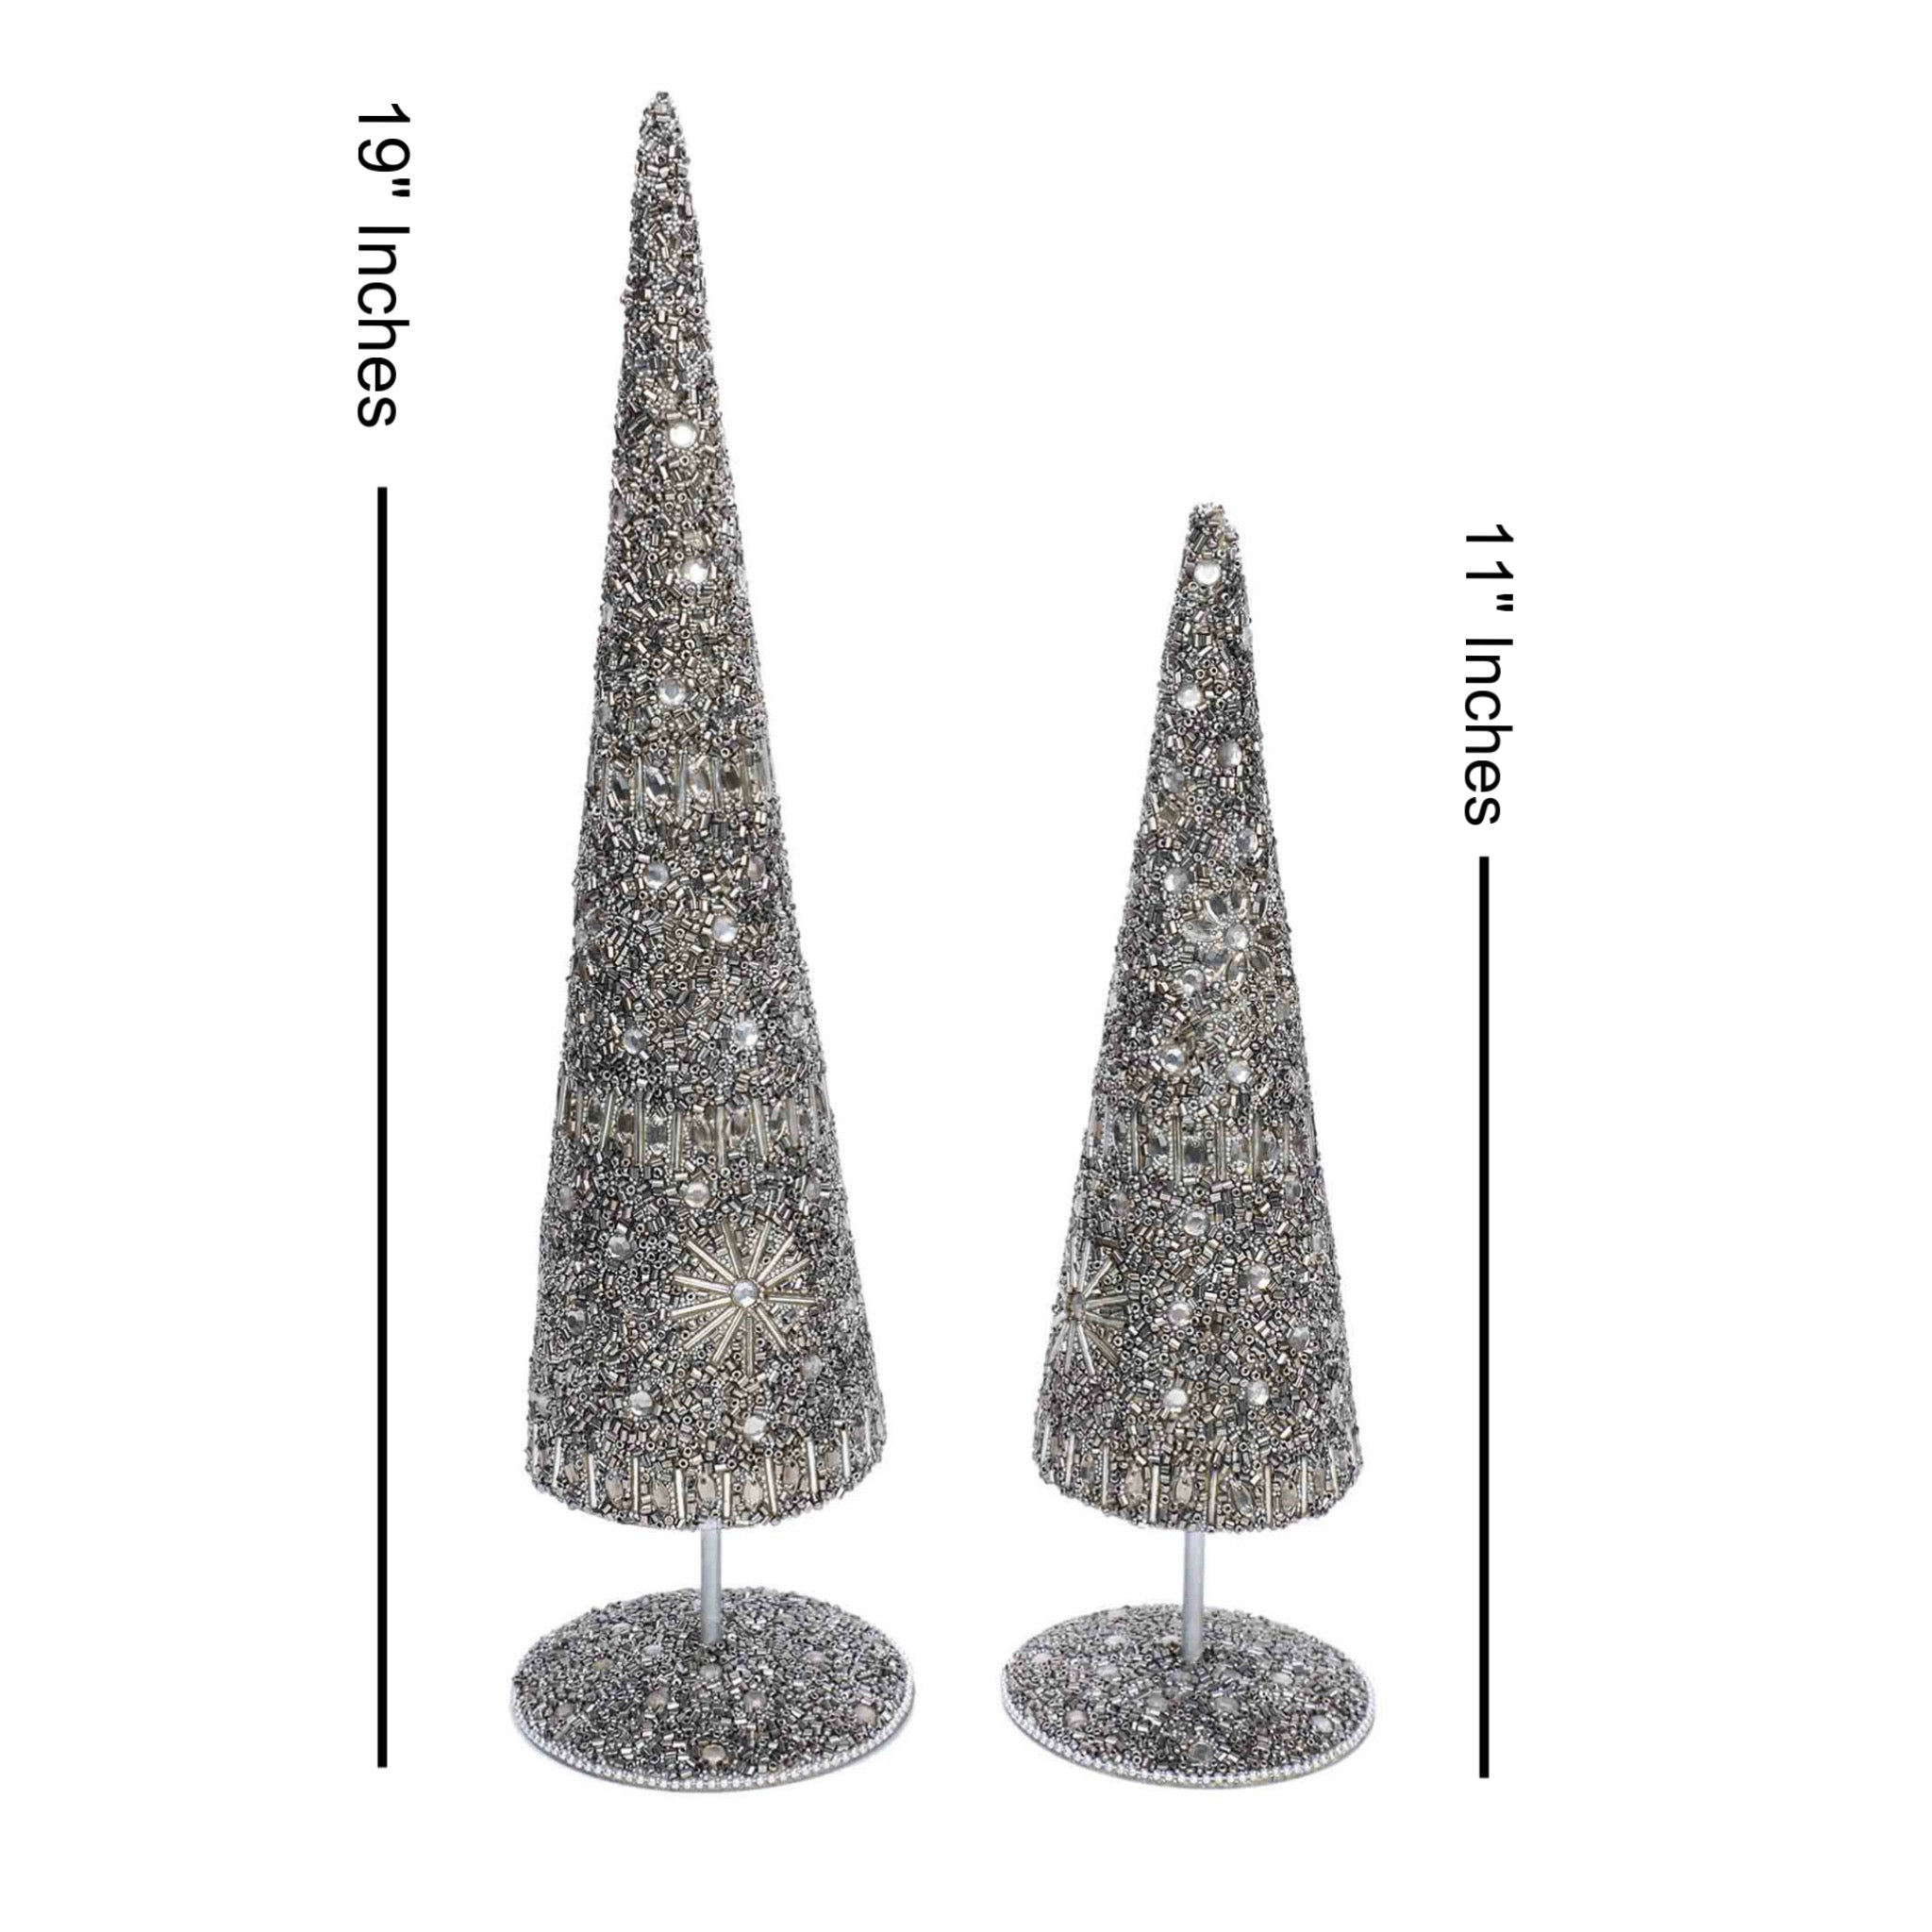 Enchanted Christmas Tree Duo in Silver, Set of 2